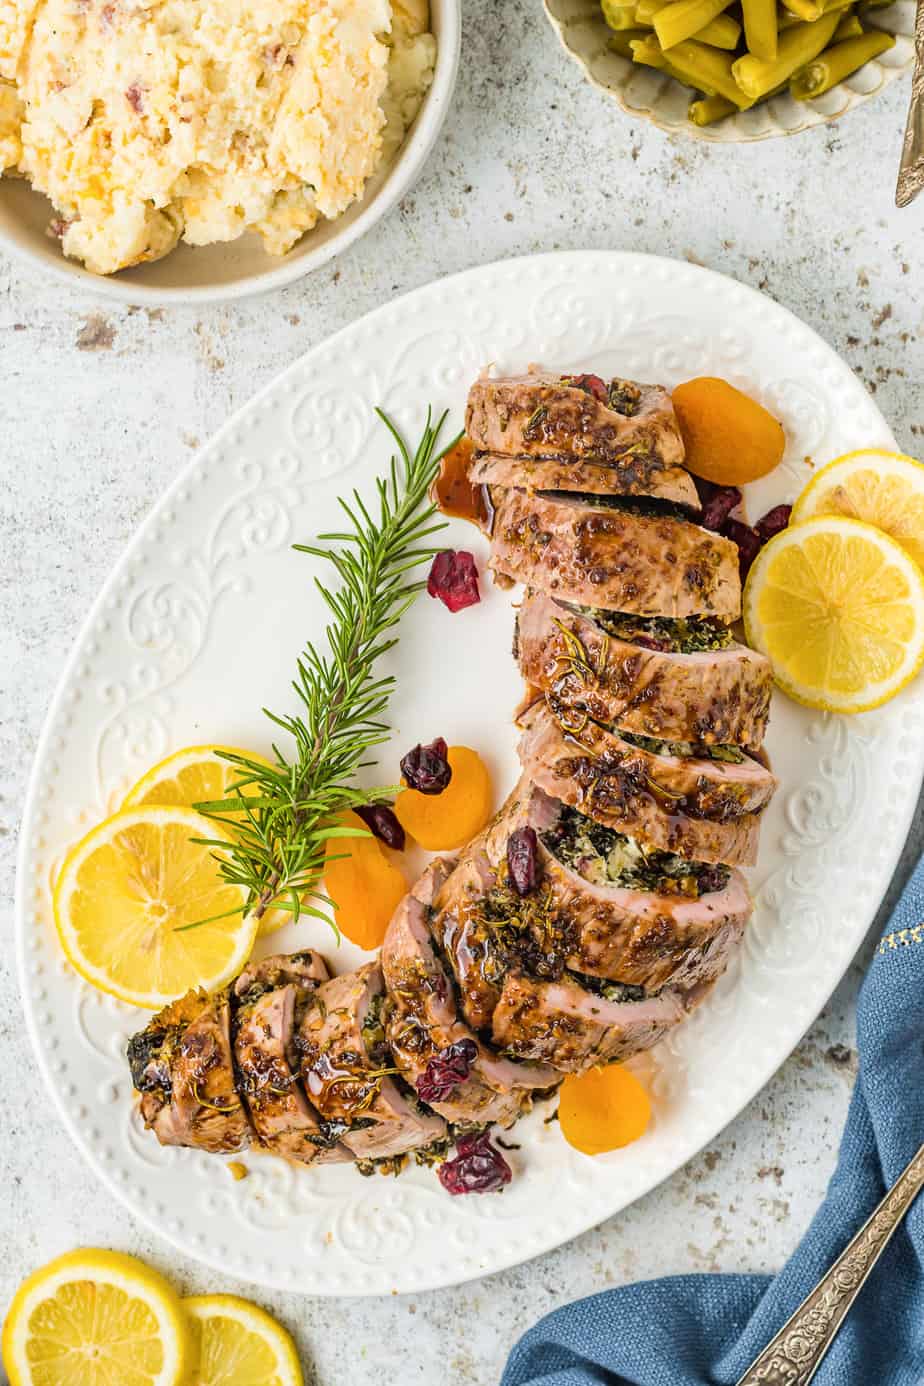 Pork tenderloin stuffed and sliced into rounds on a serving platter from overhead on a kitchen counter. Slices of lemon, rosemary and dried fruit garnish the platter and sides of green beans and mashed potatoes can be seen at the edge of the image.